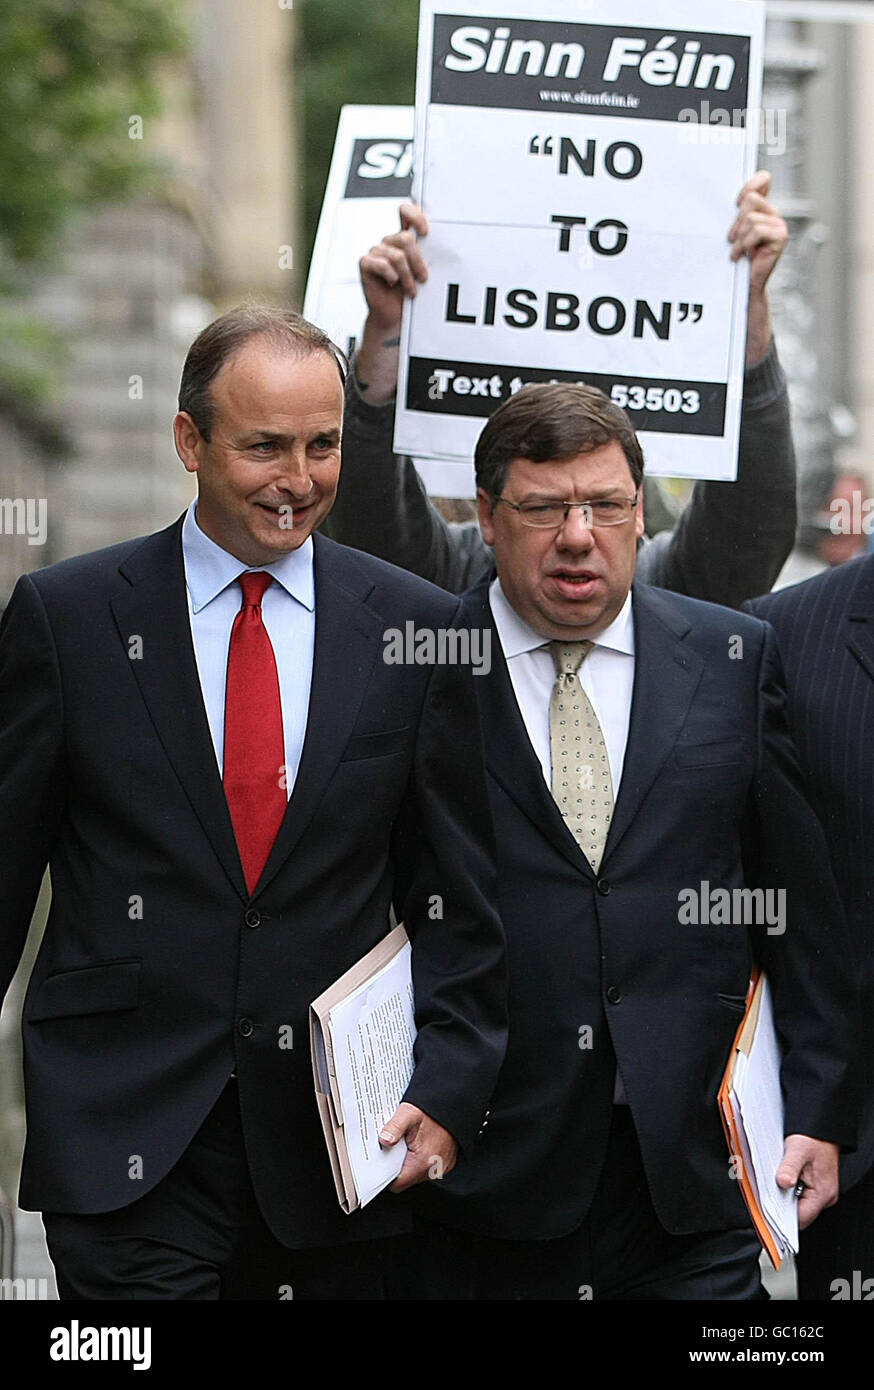 Sinn Fein supporters advocating a No Vote, as Taoiseach Brian Cowen (right) and Minister for Foreign Affairs Michael Martin of Fianna Fail arrive to launch their Lisbon campaign at The Royal College of Physicians on Kildare Street in Dublin. Stock Photo